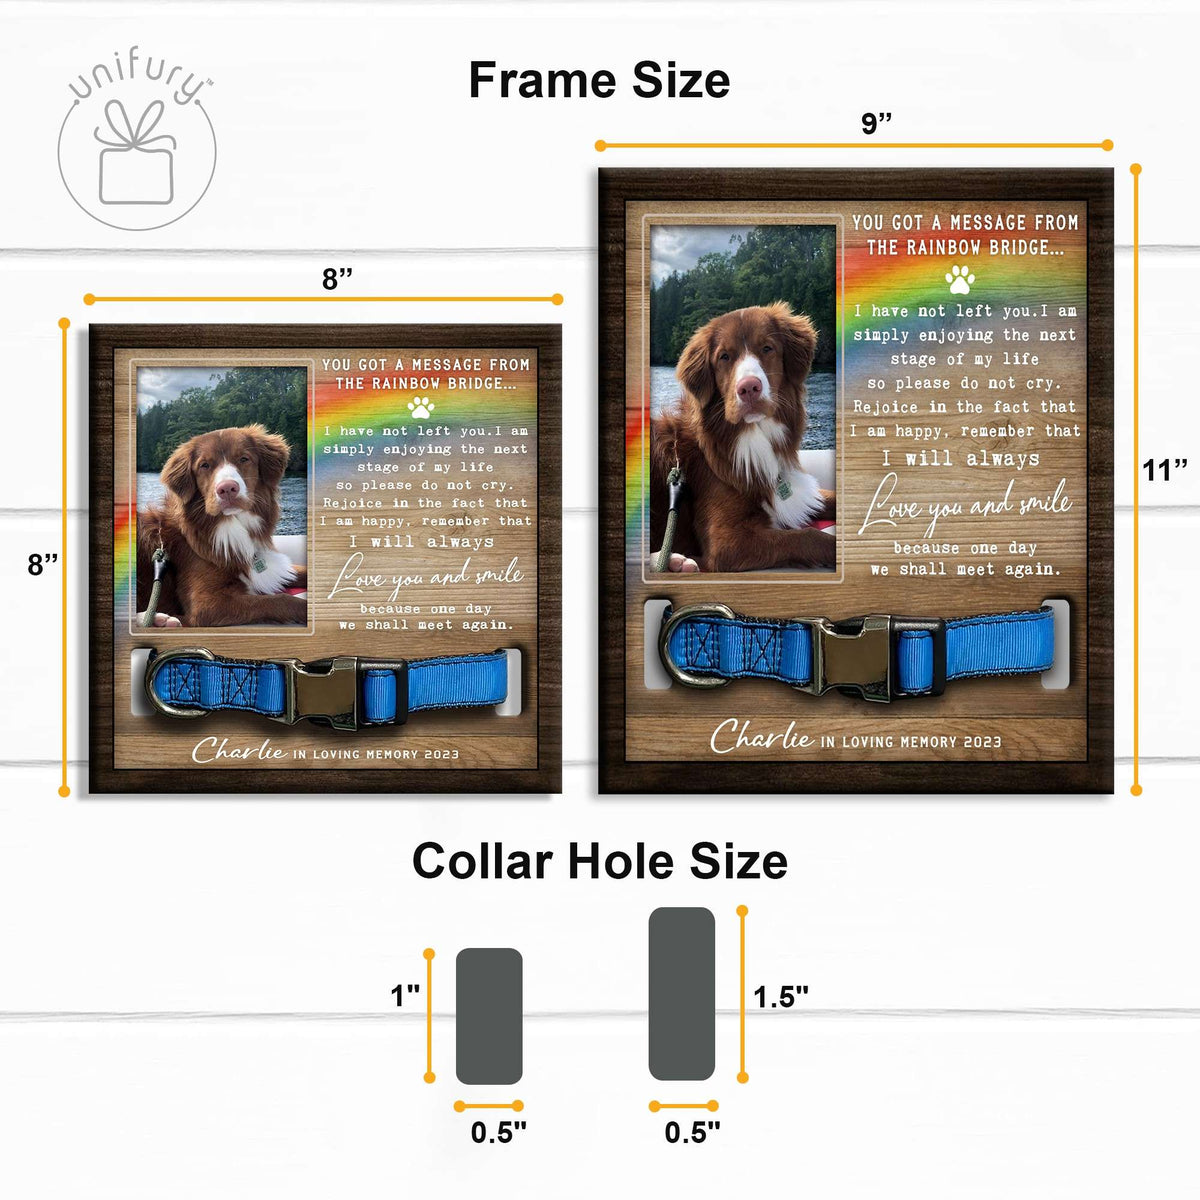 Love You And Smile Personalized Memorial Wooden Pet Collar Frame